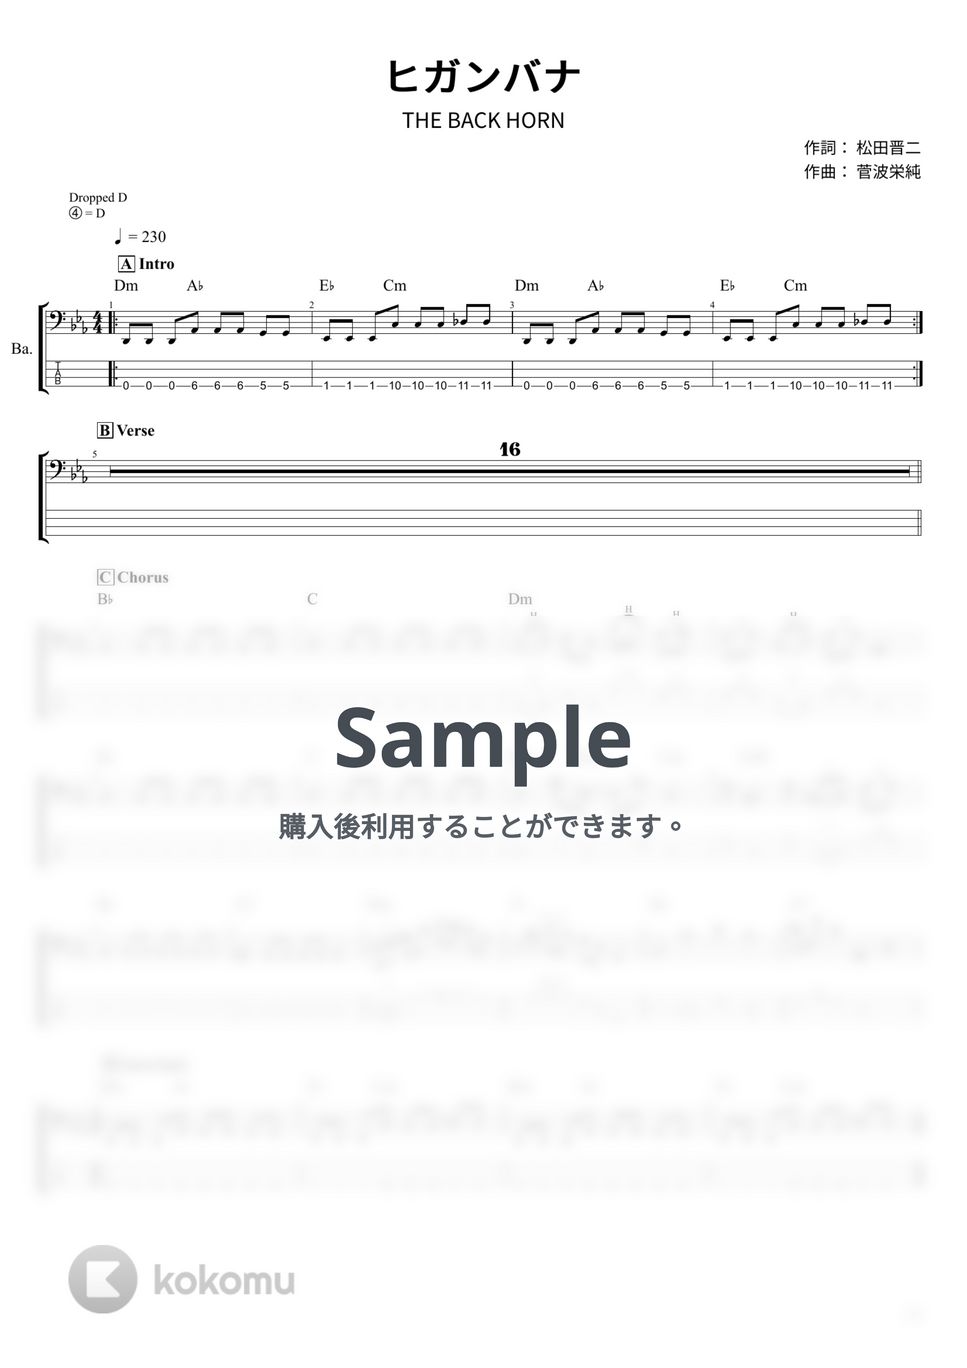 THE BACK HORN - ヒガンバナ (ベース Tab譜 4弦) by T's bass score